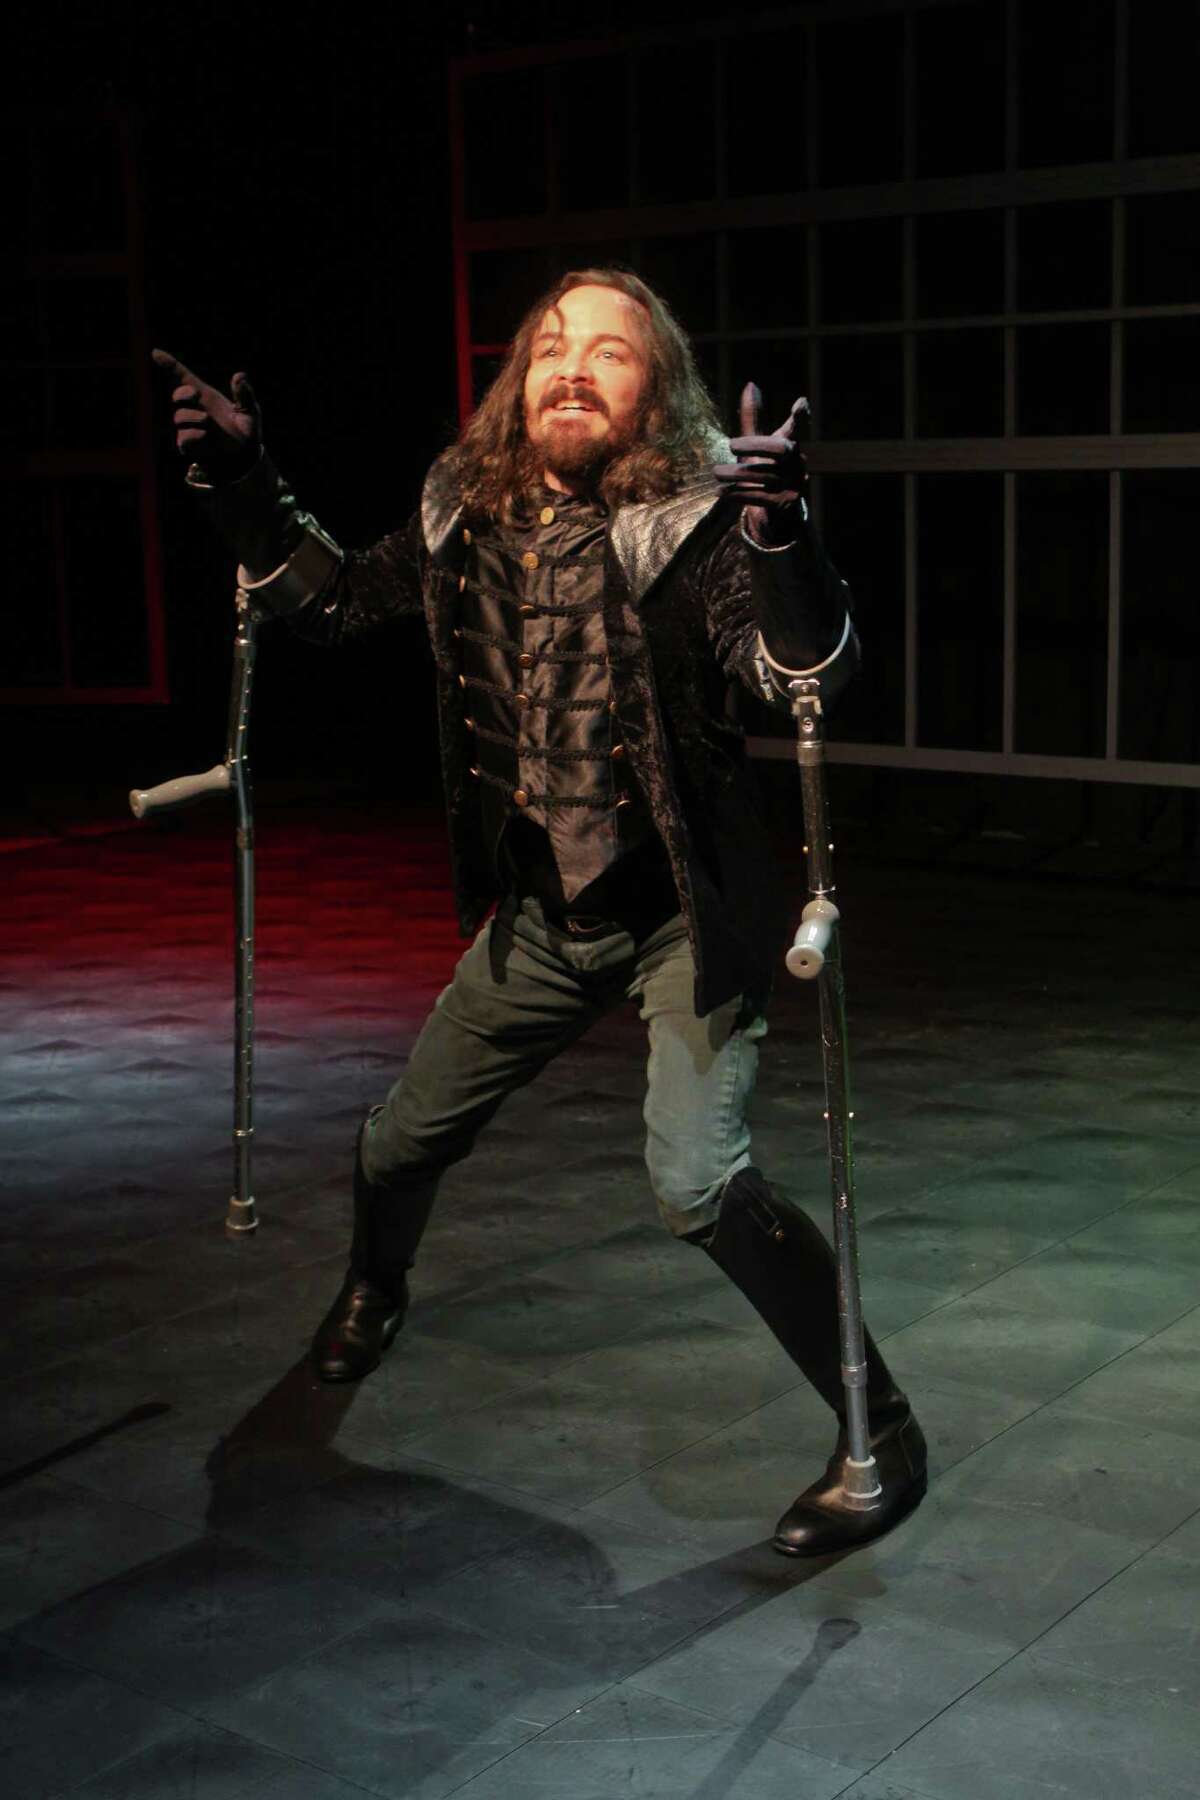 (For the Chronicle/Gary Fountain, April 15, 2012) Guy Roberts as Richard, in this scene from Main Street Theater's production of Shakespeare's Richard III.